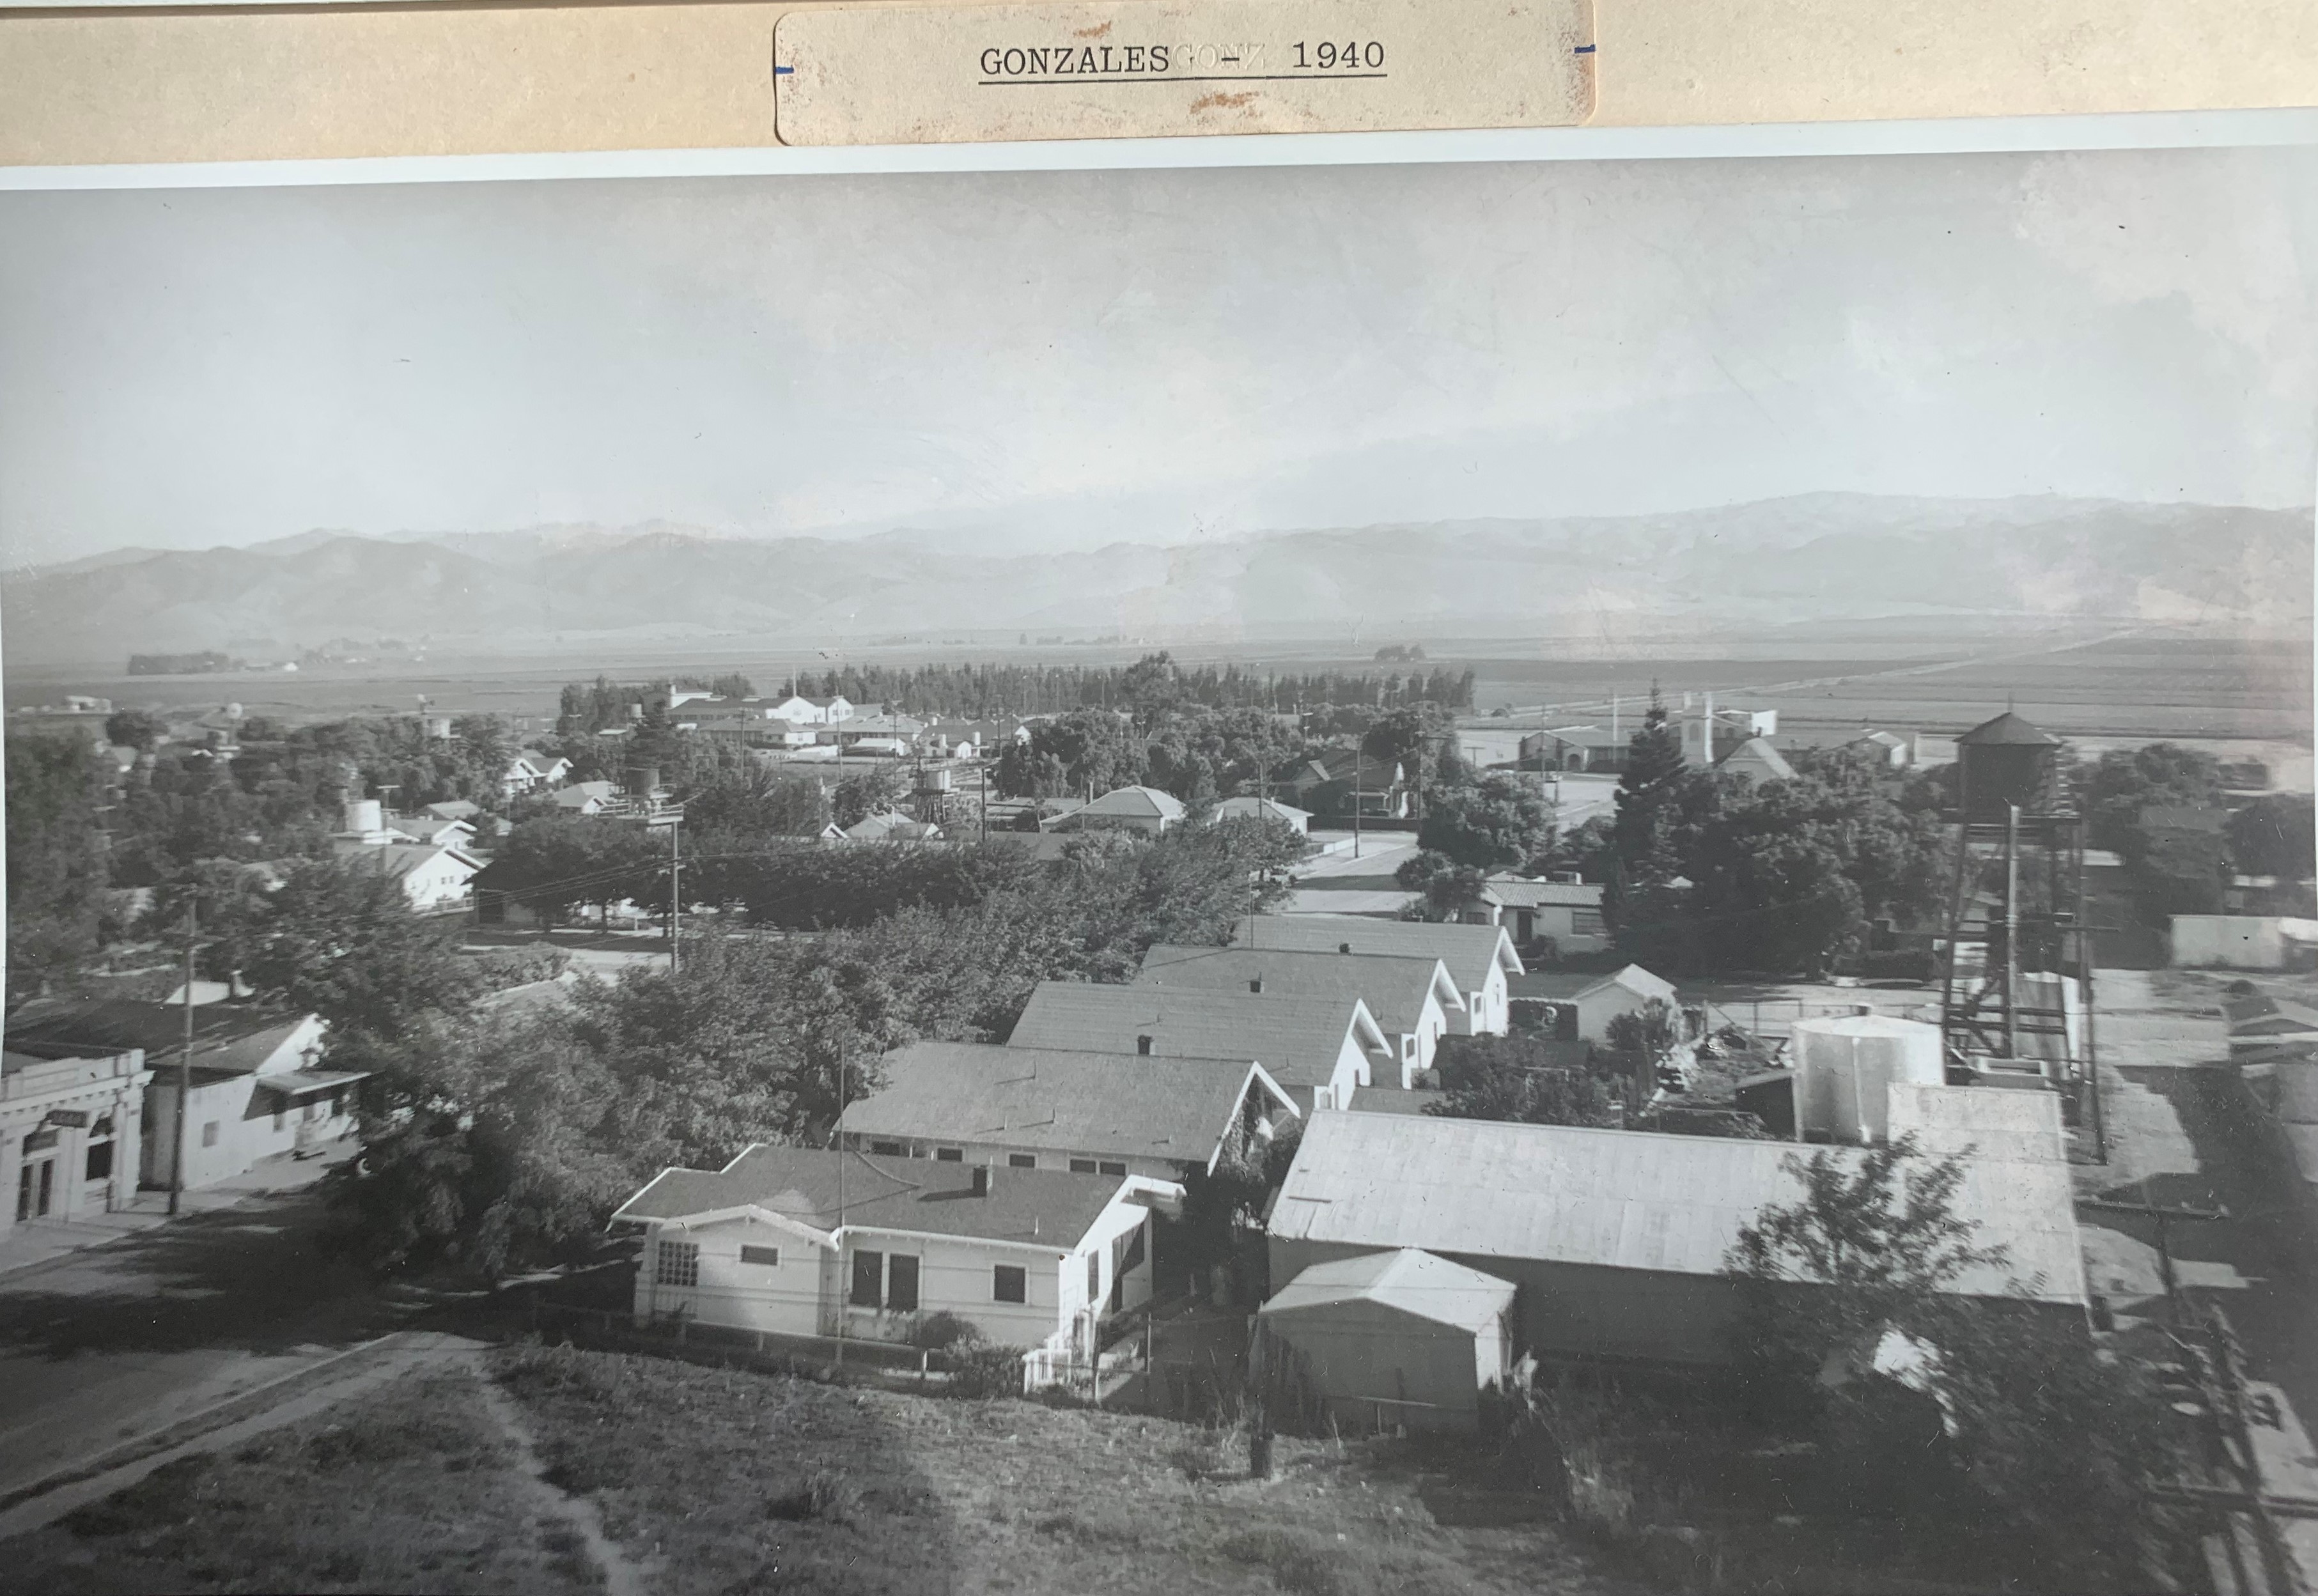 Historic pictures of Gonzales from 1940